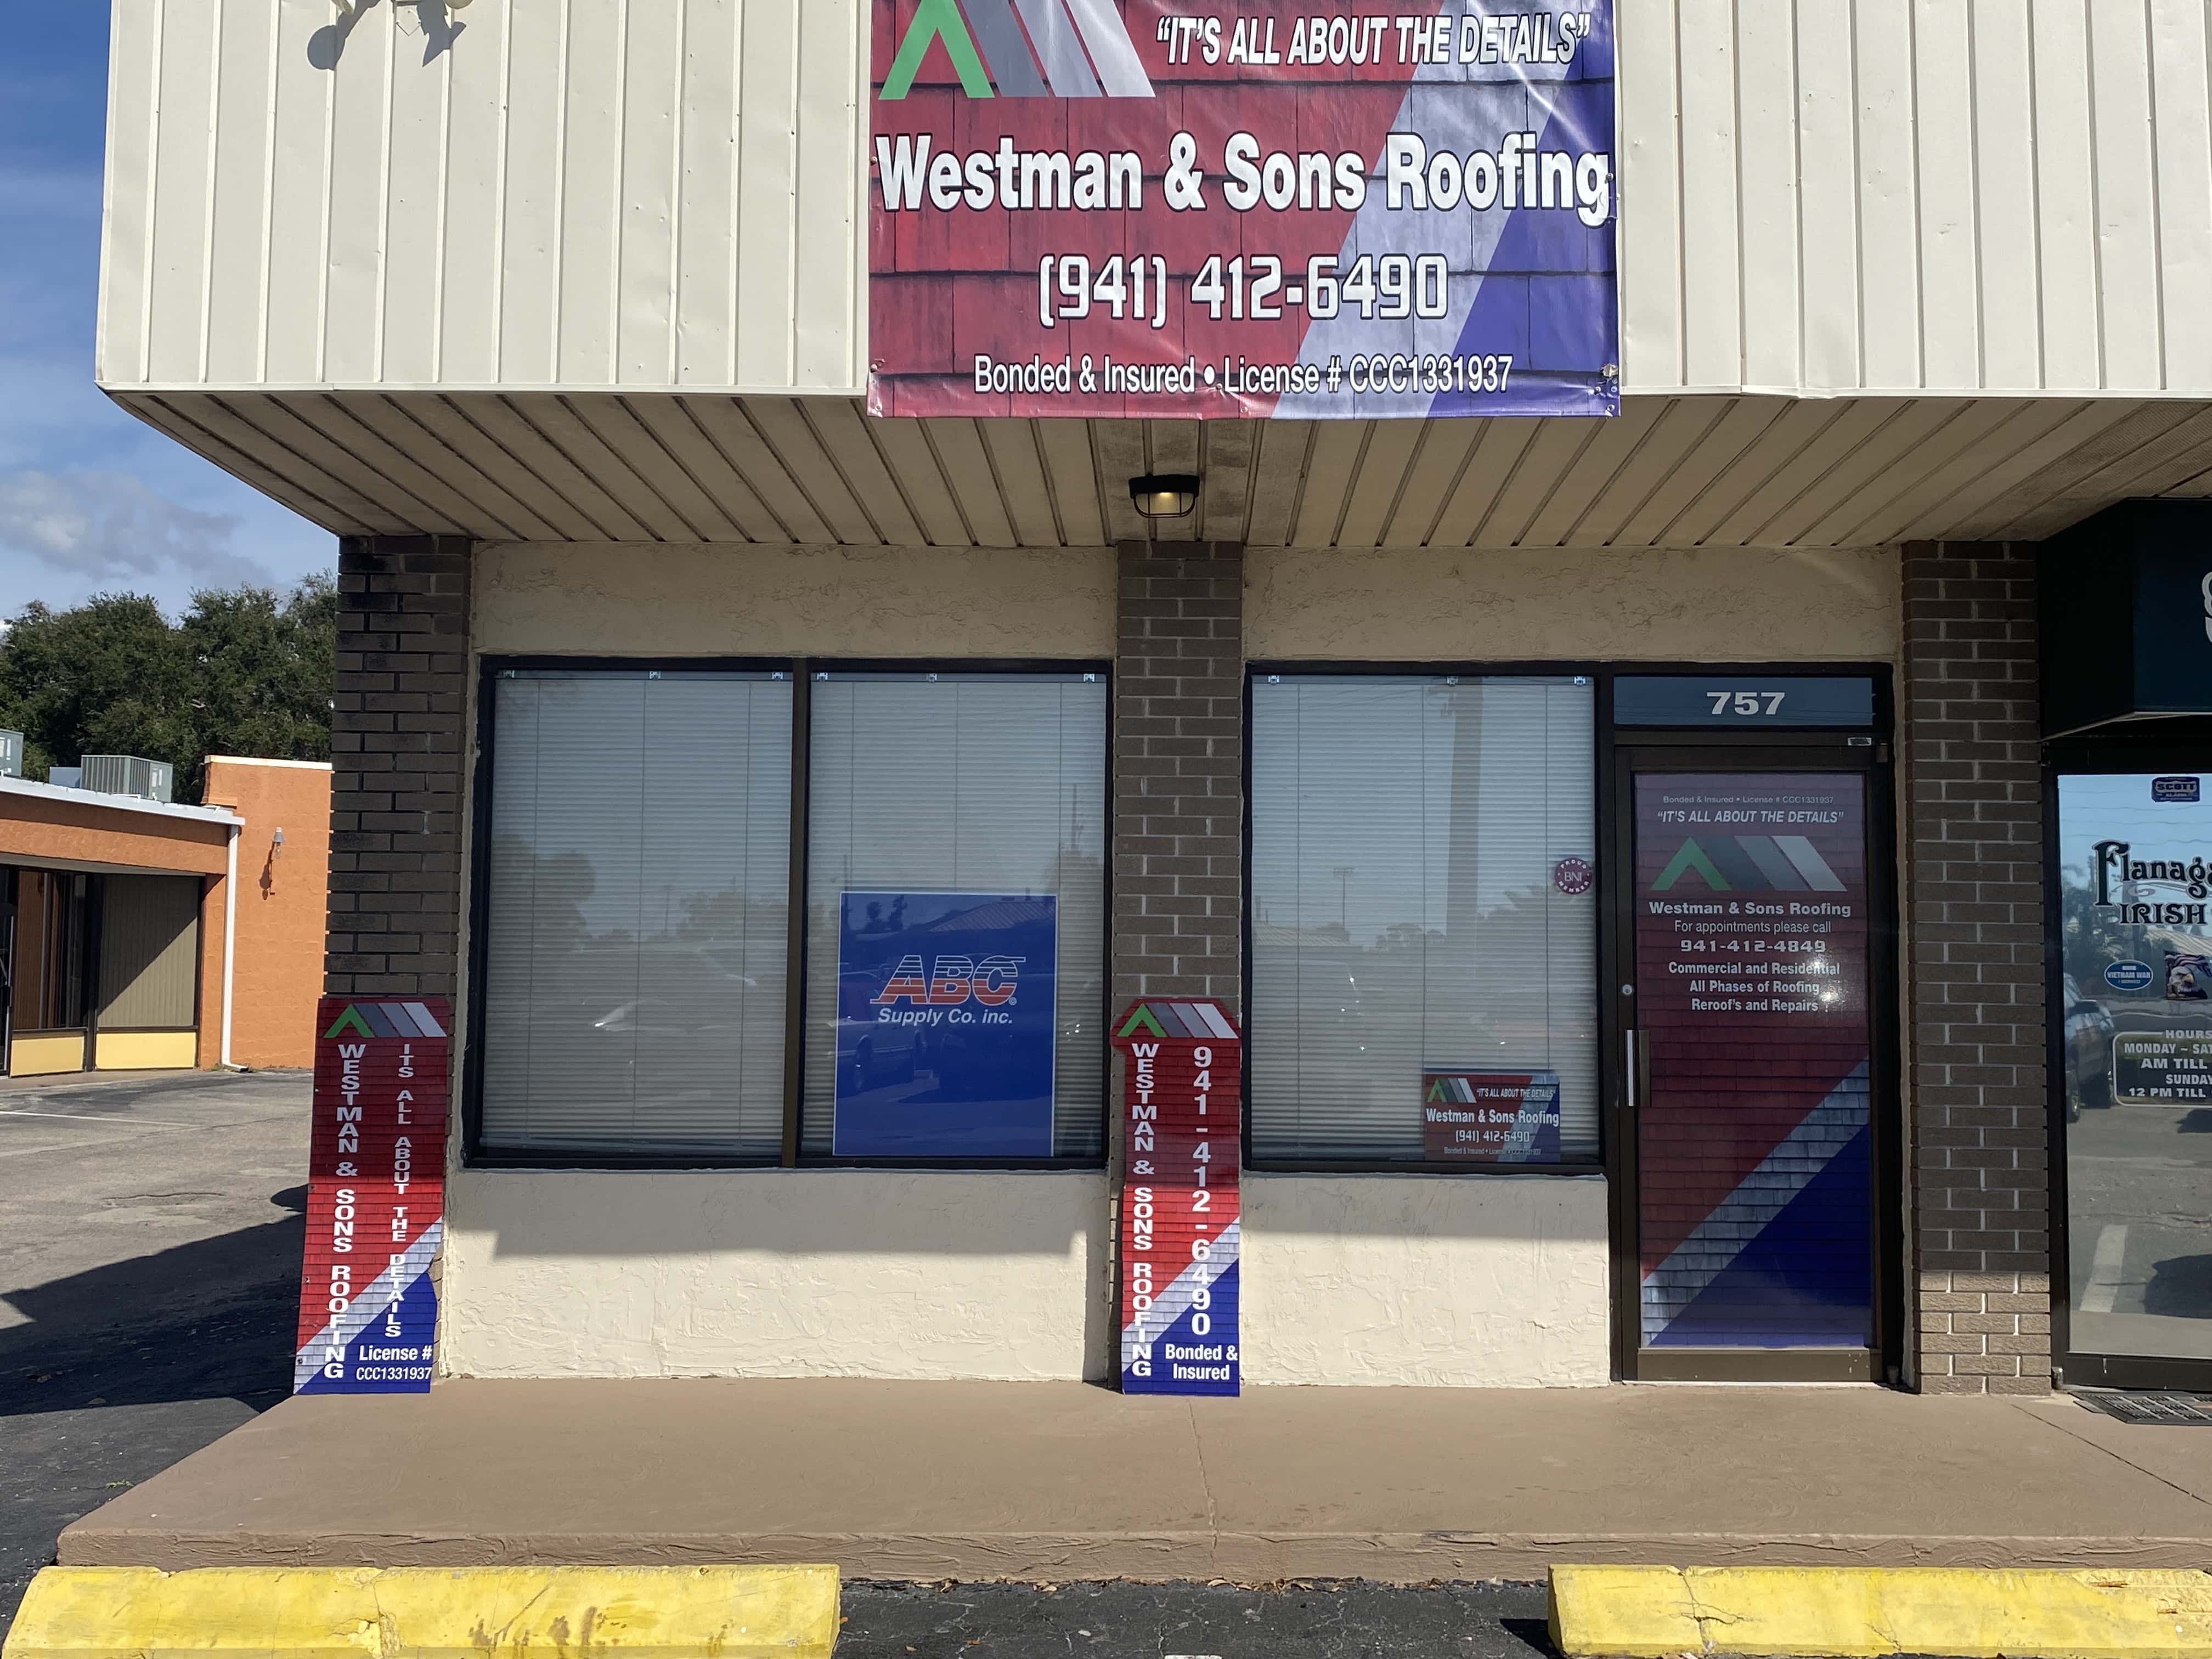 Westman & Sons Roofing - Venice, FL, US, roofing business